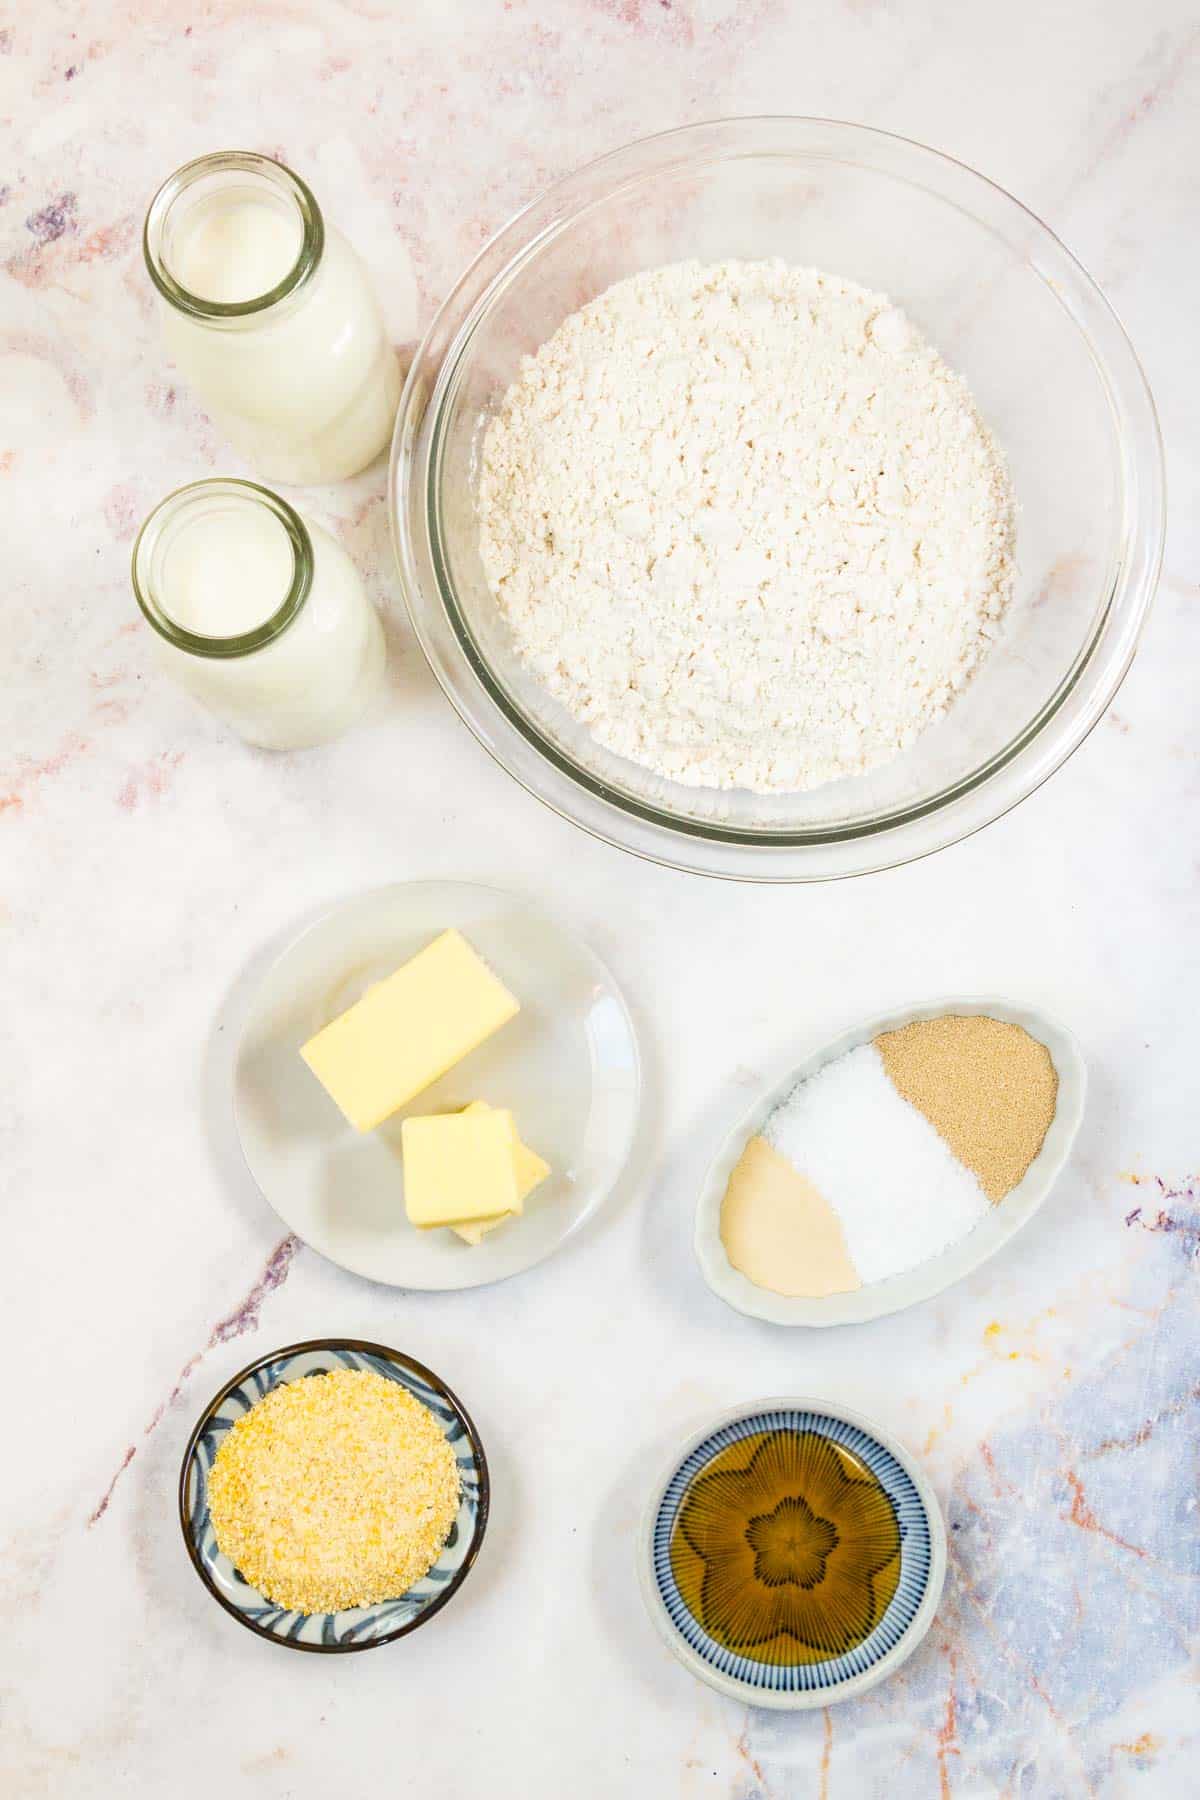 All of the ingredients to make fgluten free English muffins set out on a countertop.